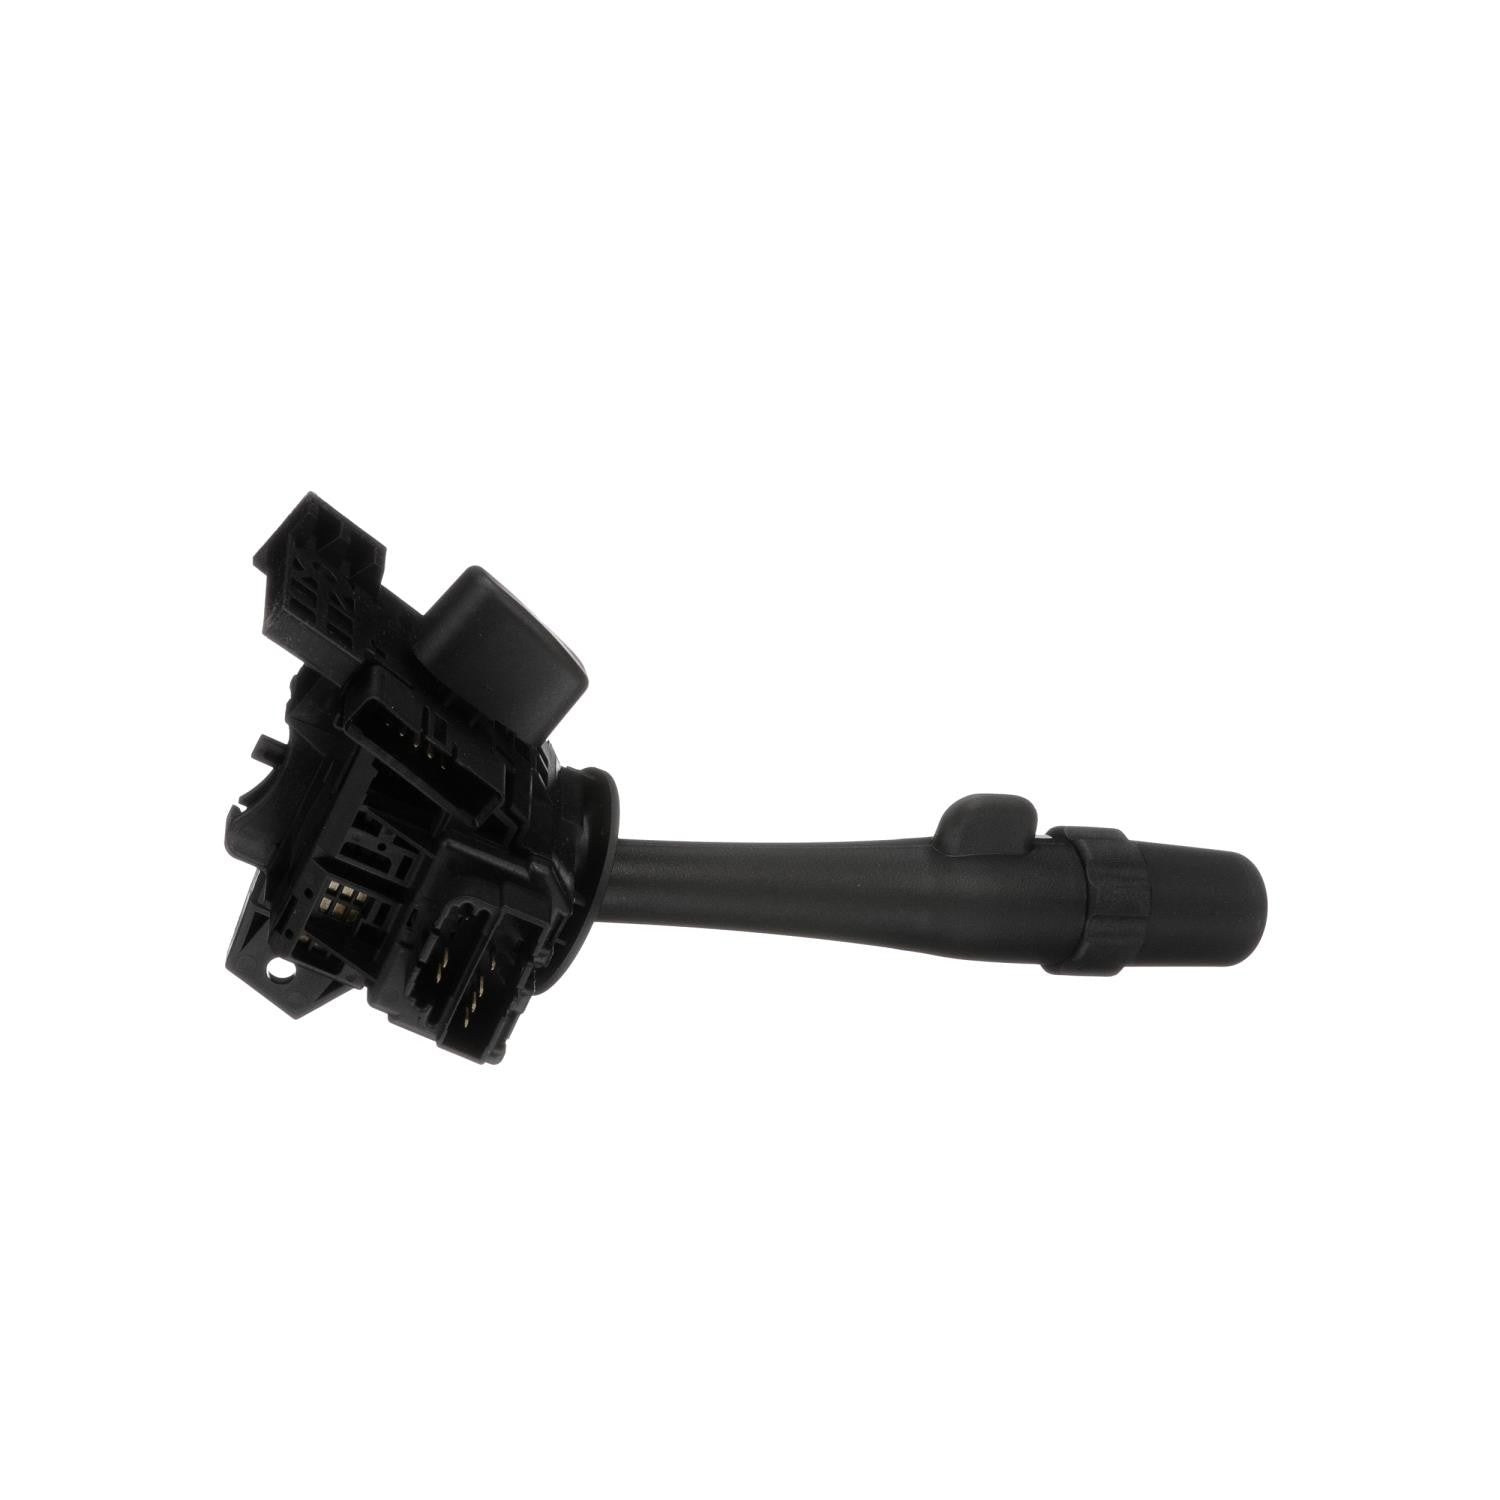 Connector View of Windshield Wiper Switch STANDARD IGNITION CBS-1422